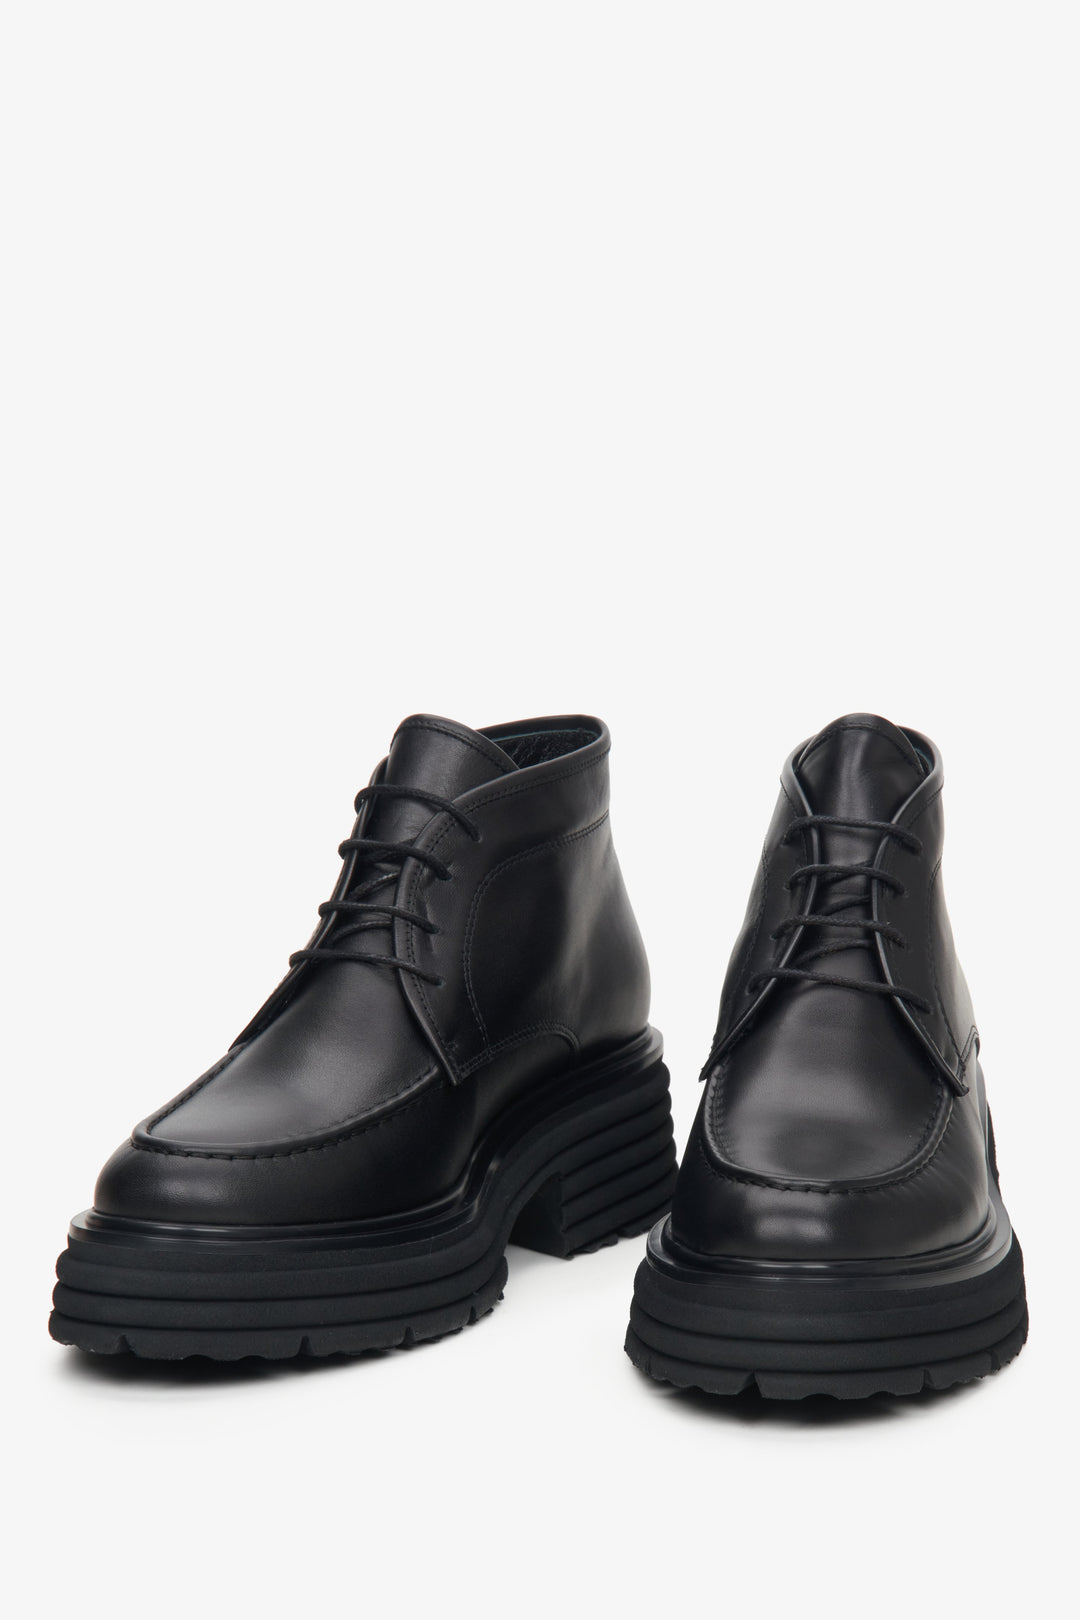 Women's black boots in genuine leather by Estro - close-up on the toe of the shoes.